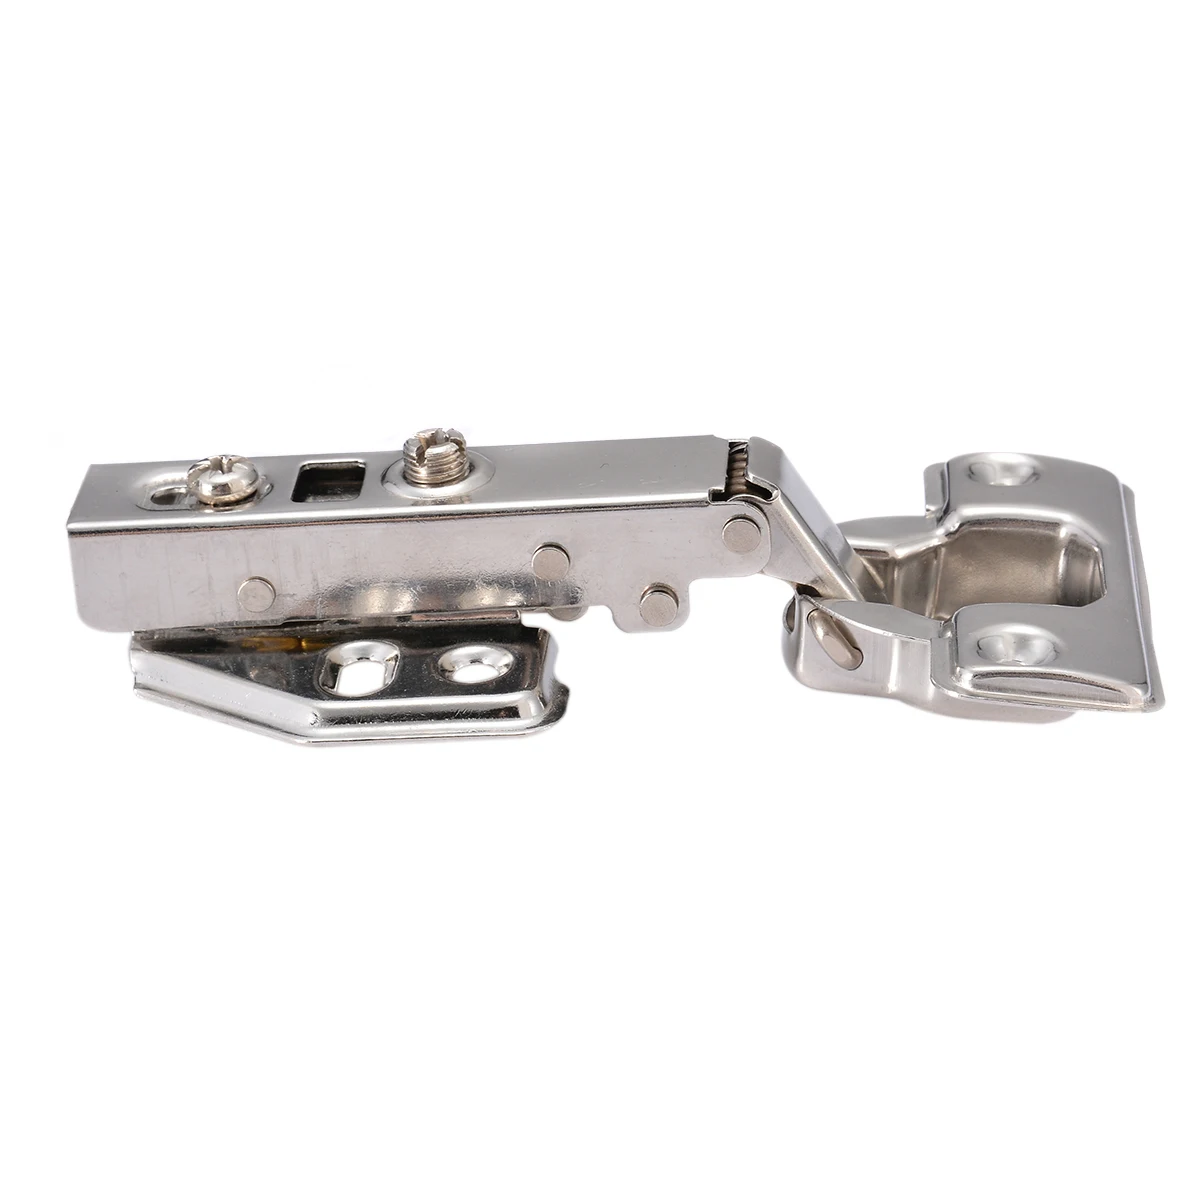 Safety Door Hydraulic Hinges Door Soft Close Full Overlay Hinge Plate Damper Buffer for Kitchen Cabinet Cupboard